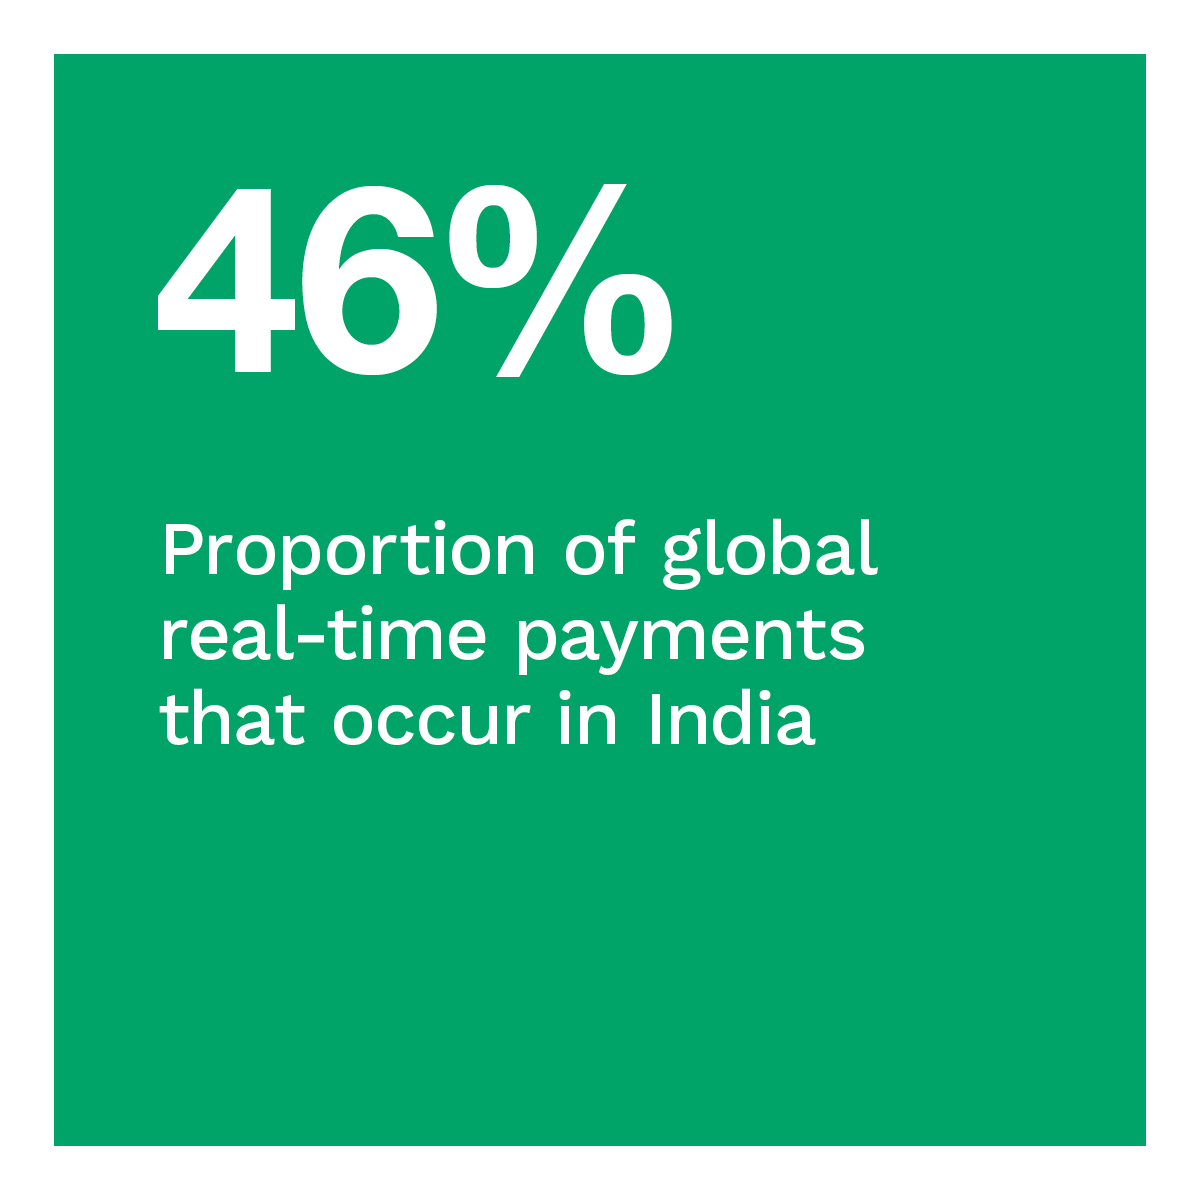  Proportion of global real-time payments that occur in India